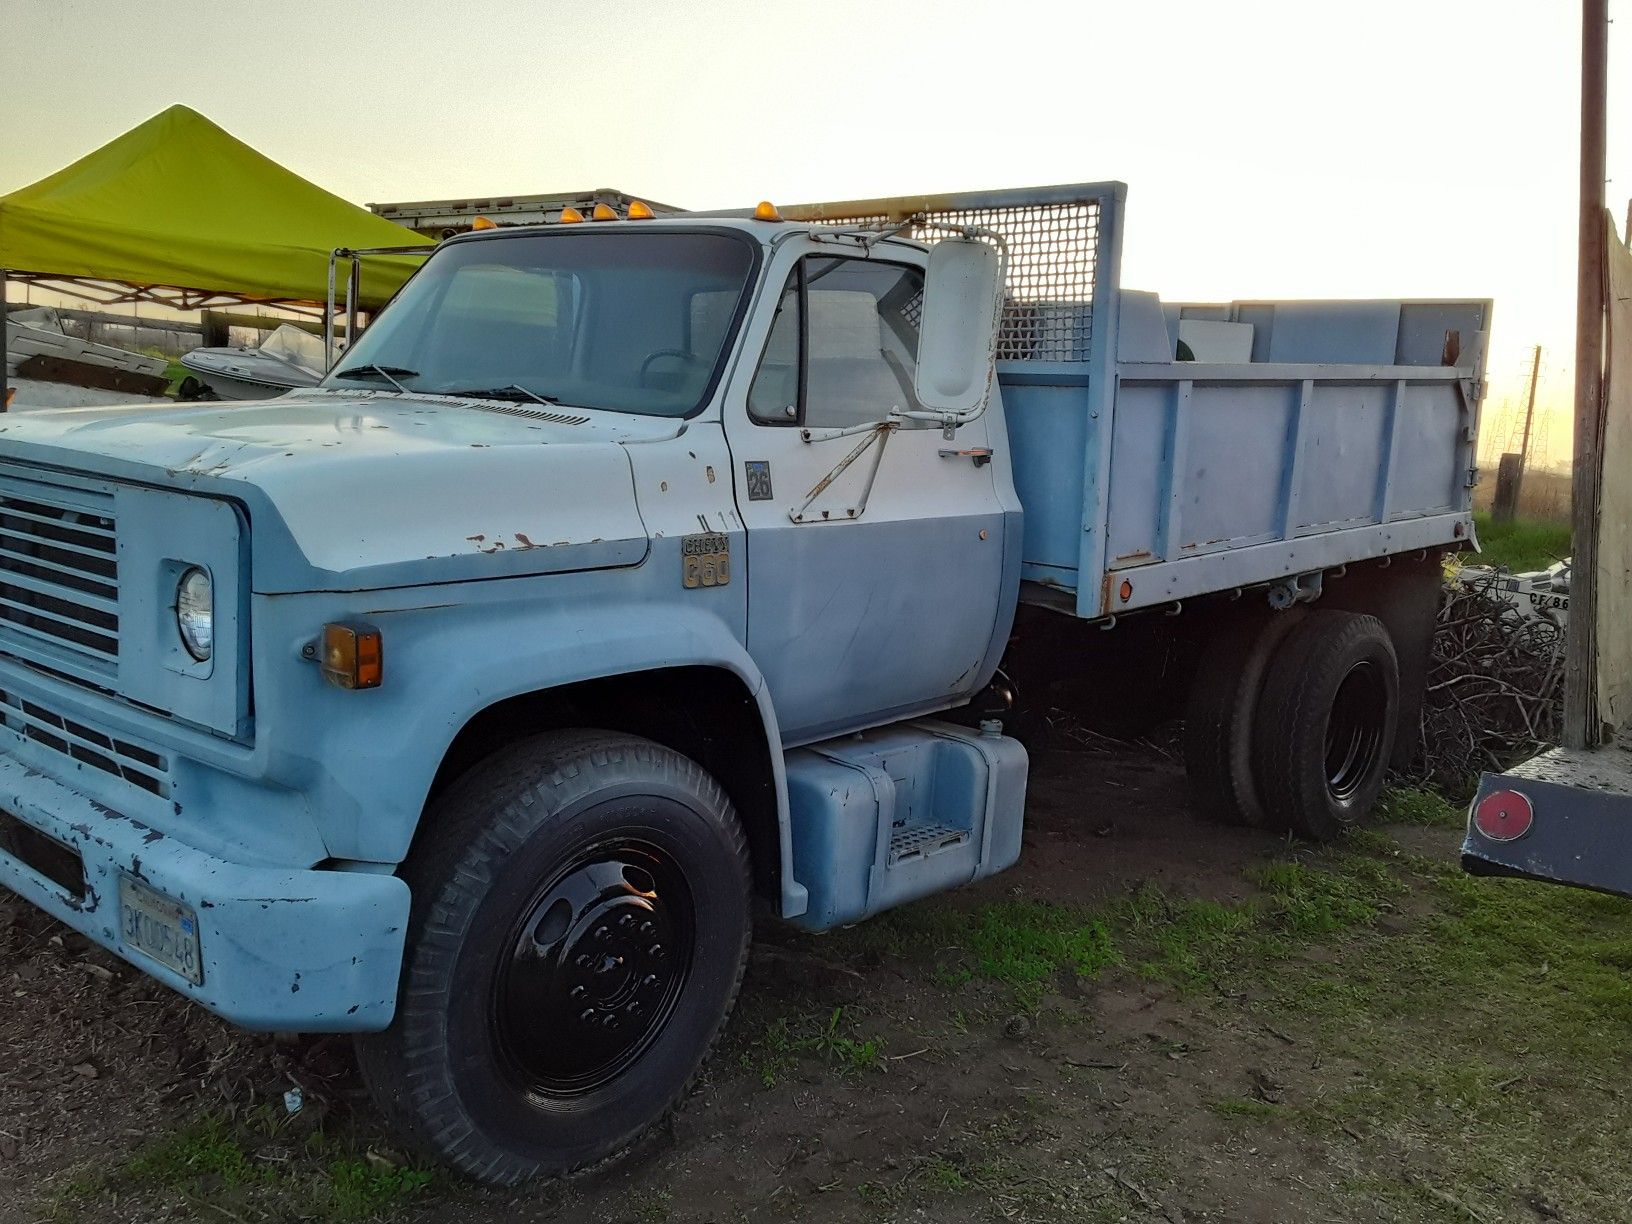 1985 Chevy C60 Dump Truck, Ready to use.